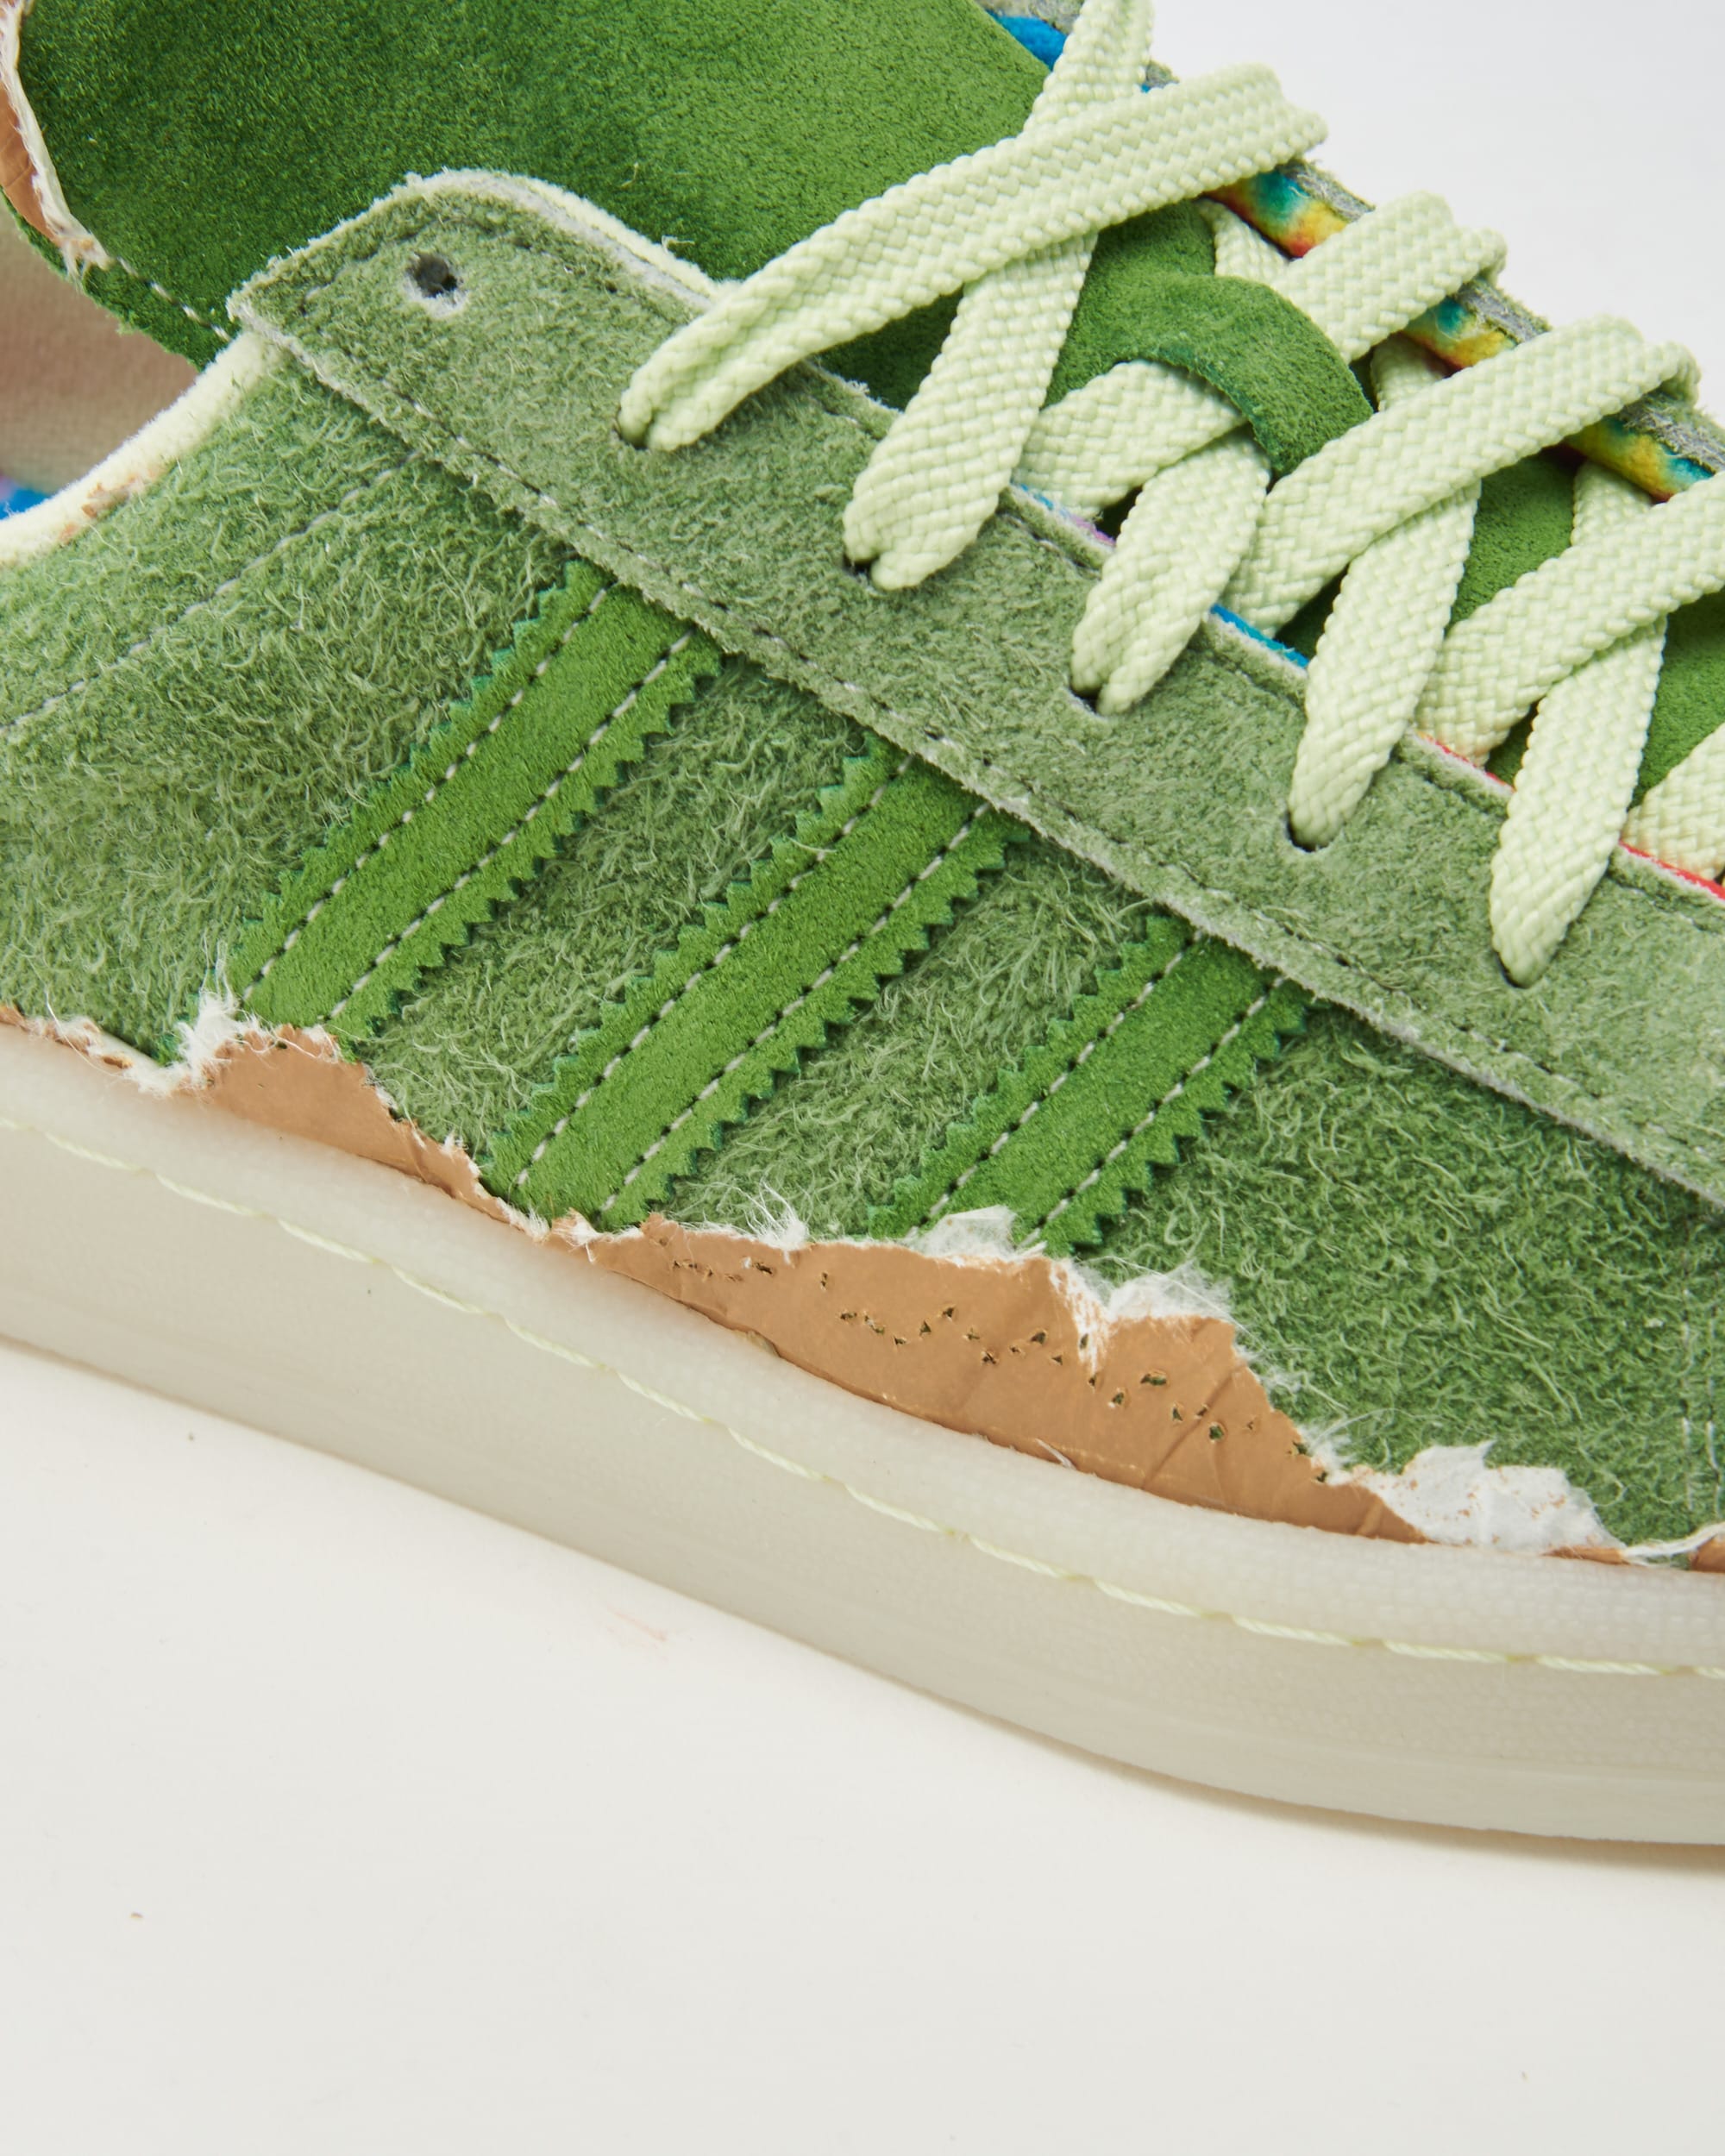 The 'Crop' Adidas 80s Feature Rolling Uppers |